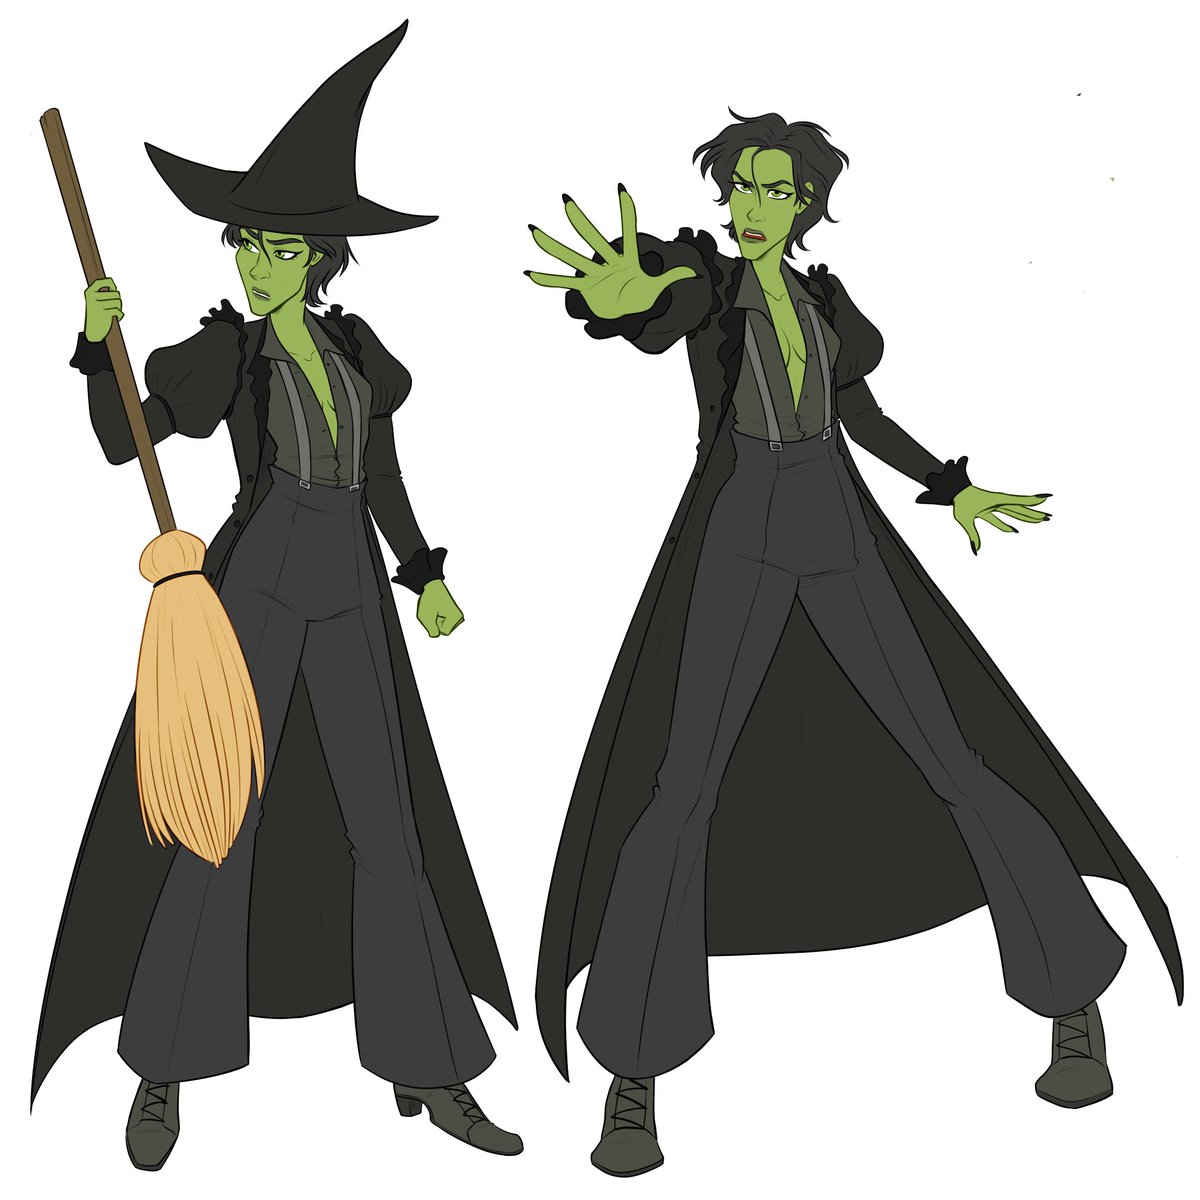 We've loved working with @val_art_ on character designs for our EverAfterVerse books! She always manages to squeeze so much personality into the looks of the characters - and her Glinda and Wicked Witch of the West are no exception!